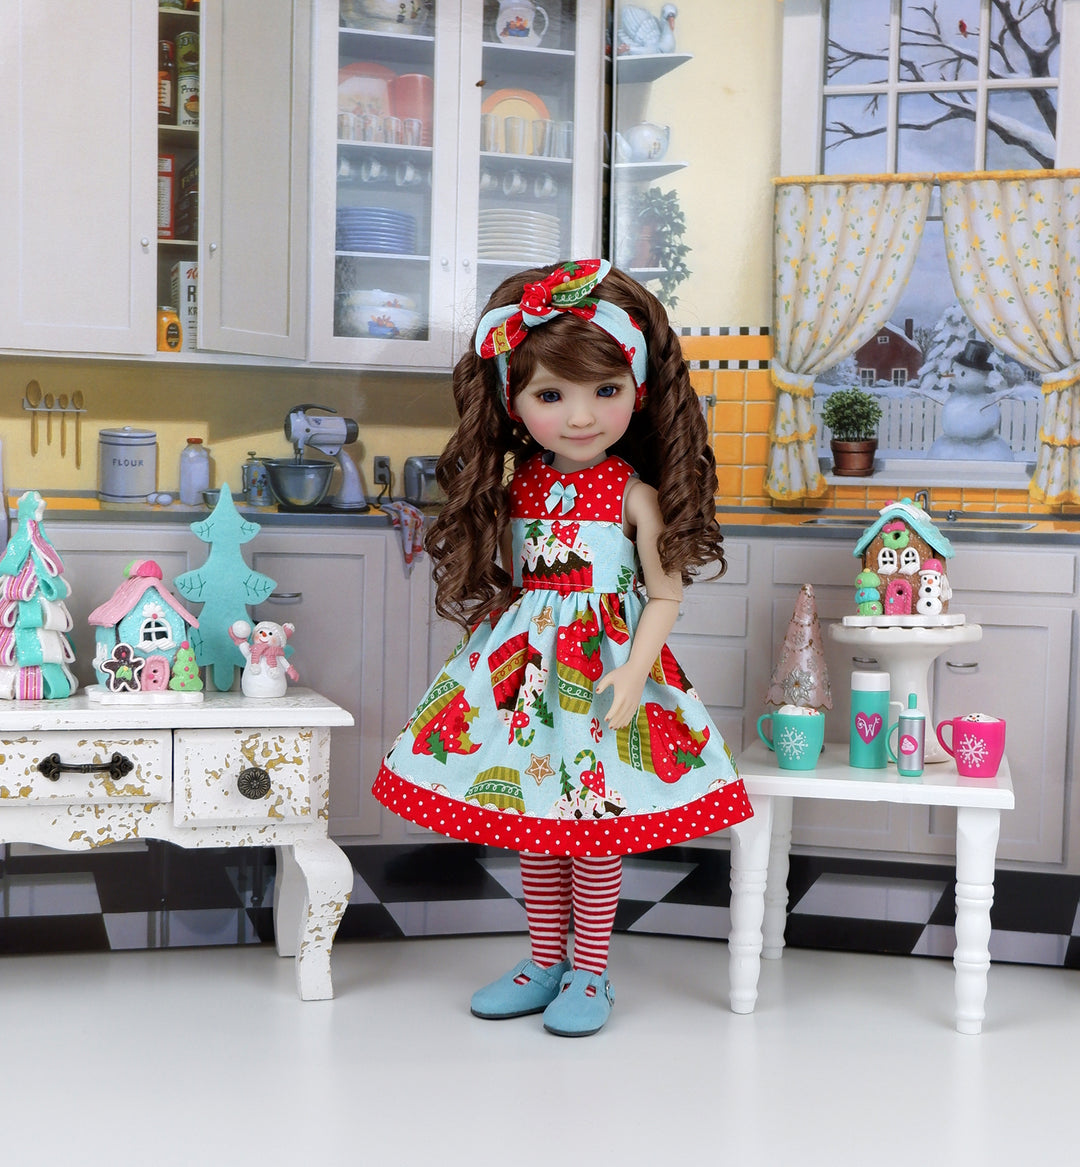 Christmas Cupcakes - dress and shoes for Ruby Red Fashion Friends doll